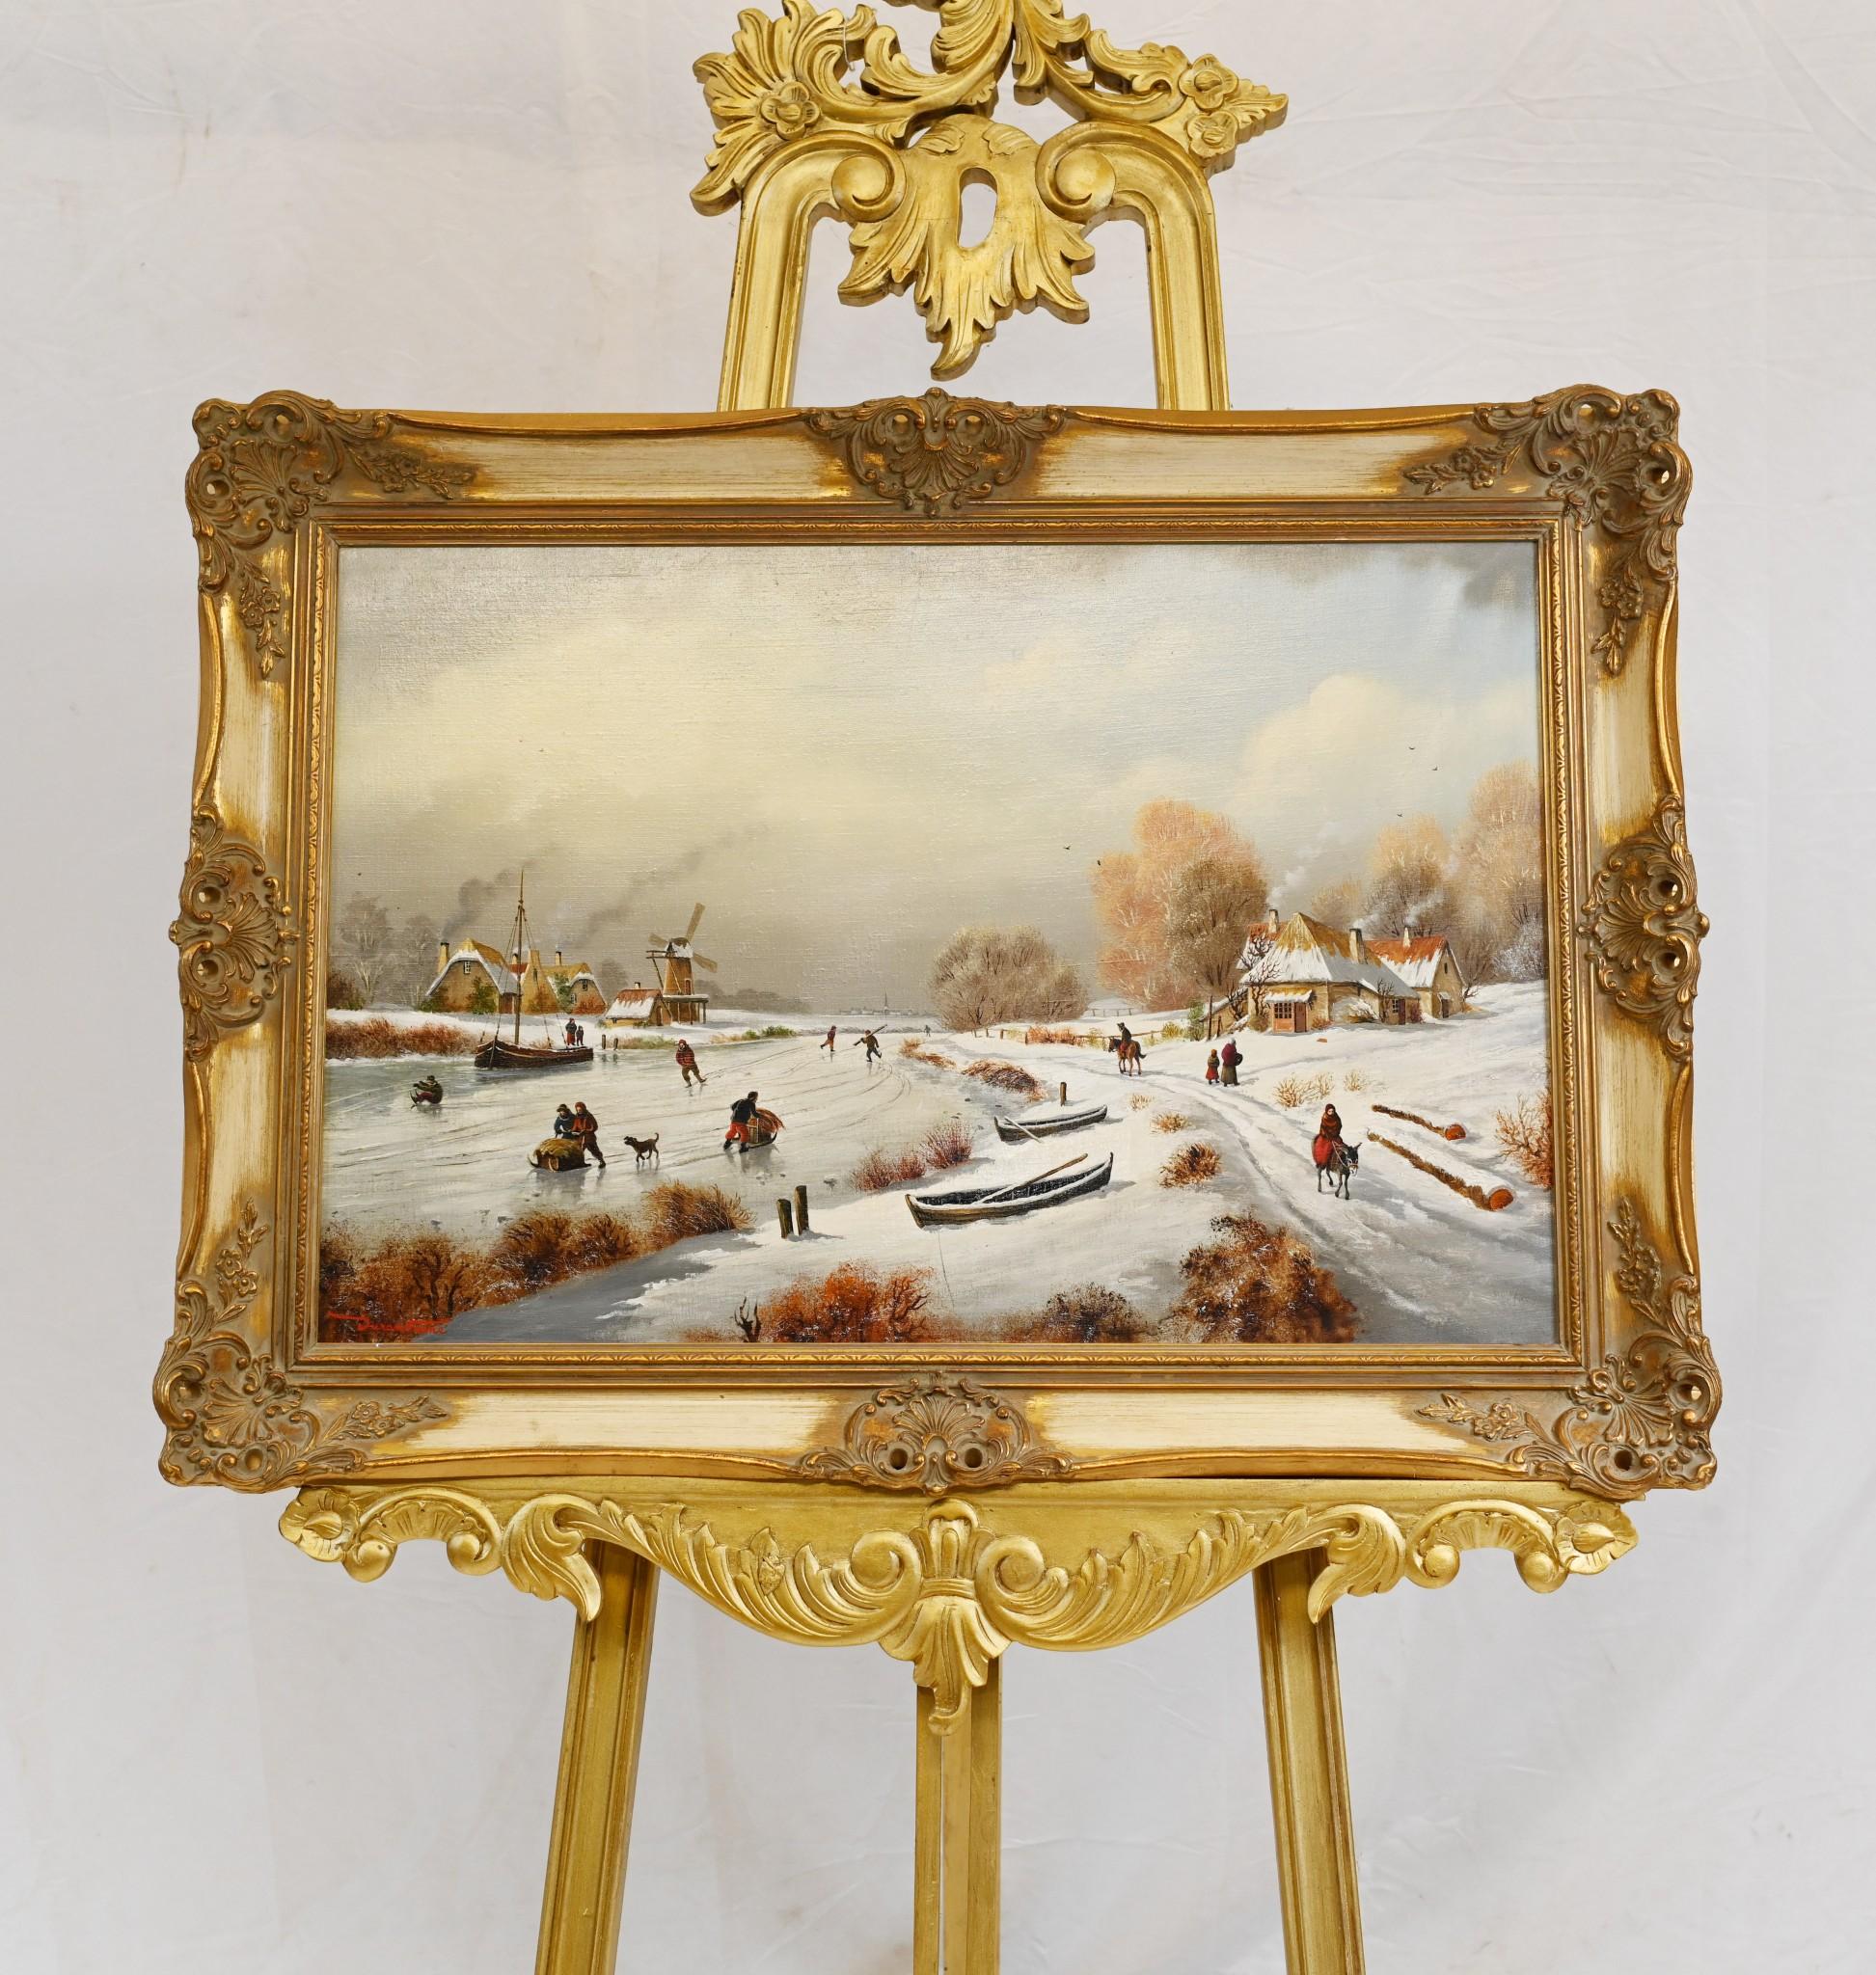 Gorgeous Flemish oil painting depiciting a gorgeous winter snow scene
The artist has really captured the scene with great skill
The river is frozen and skater and sledges travel along it
Of course there is a windmill in the background
Offered in